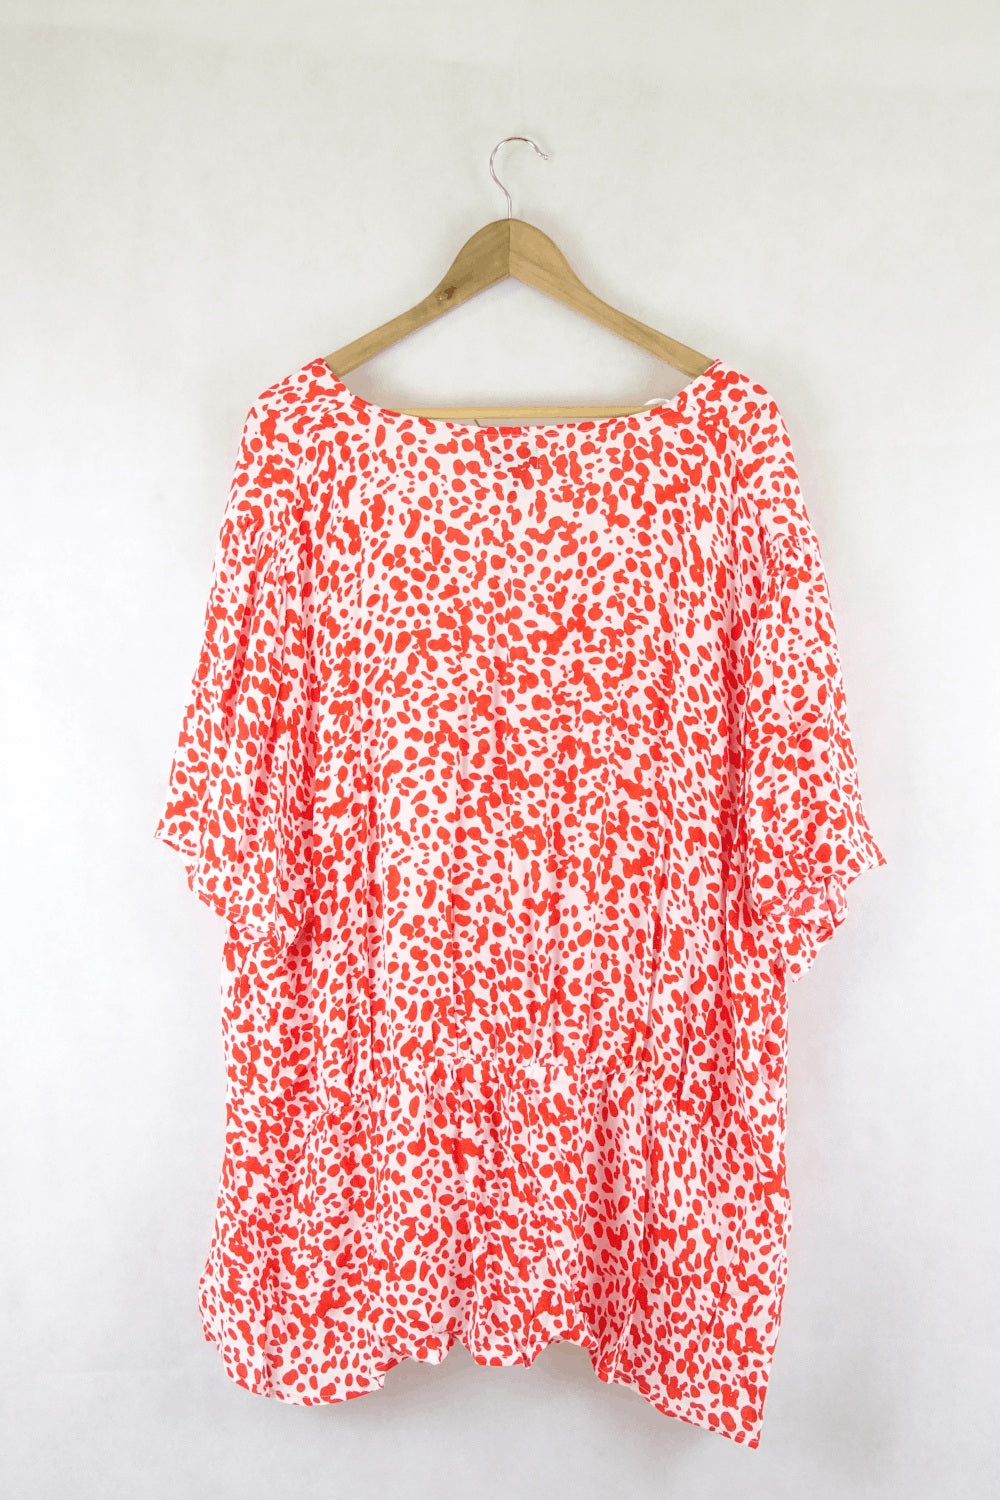 River Island Red And White Top Plus 26